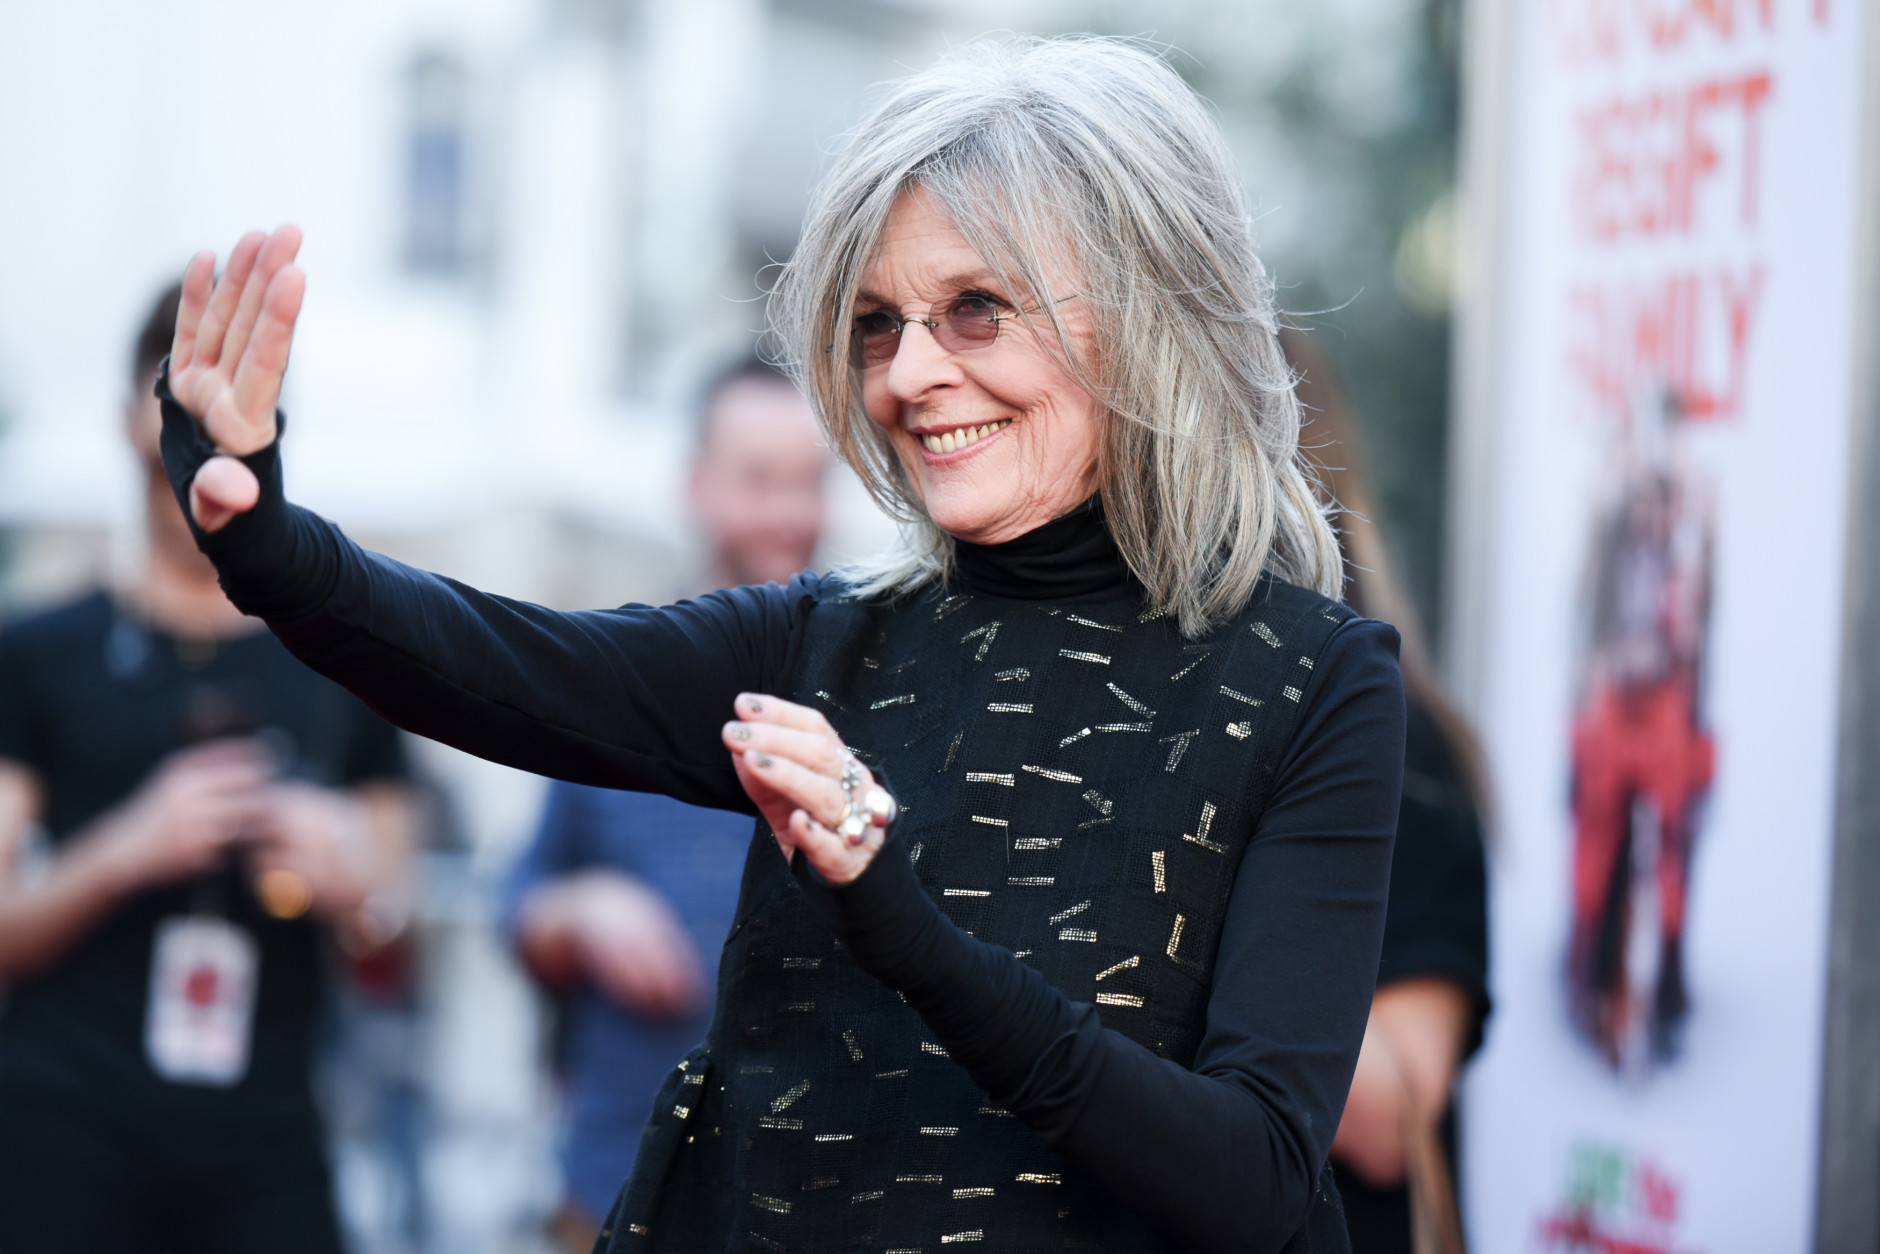 Actress Diane Keaton attends the LA Premiere of "Love The Coopers" held at The Grove on Thursday, Nov. 12, 2015, in Los Angeles. (Photo by Richard Shotwell/Invision/AP)